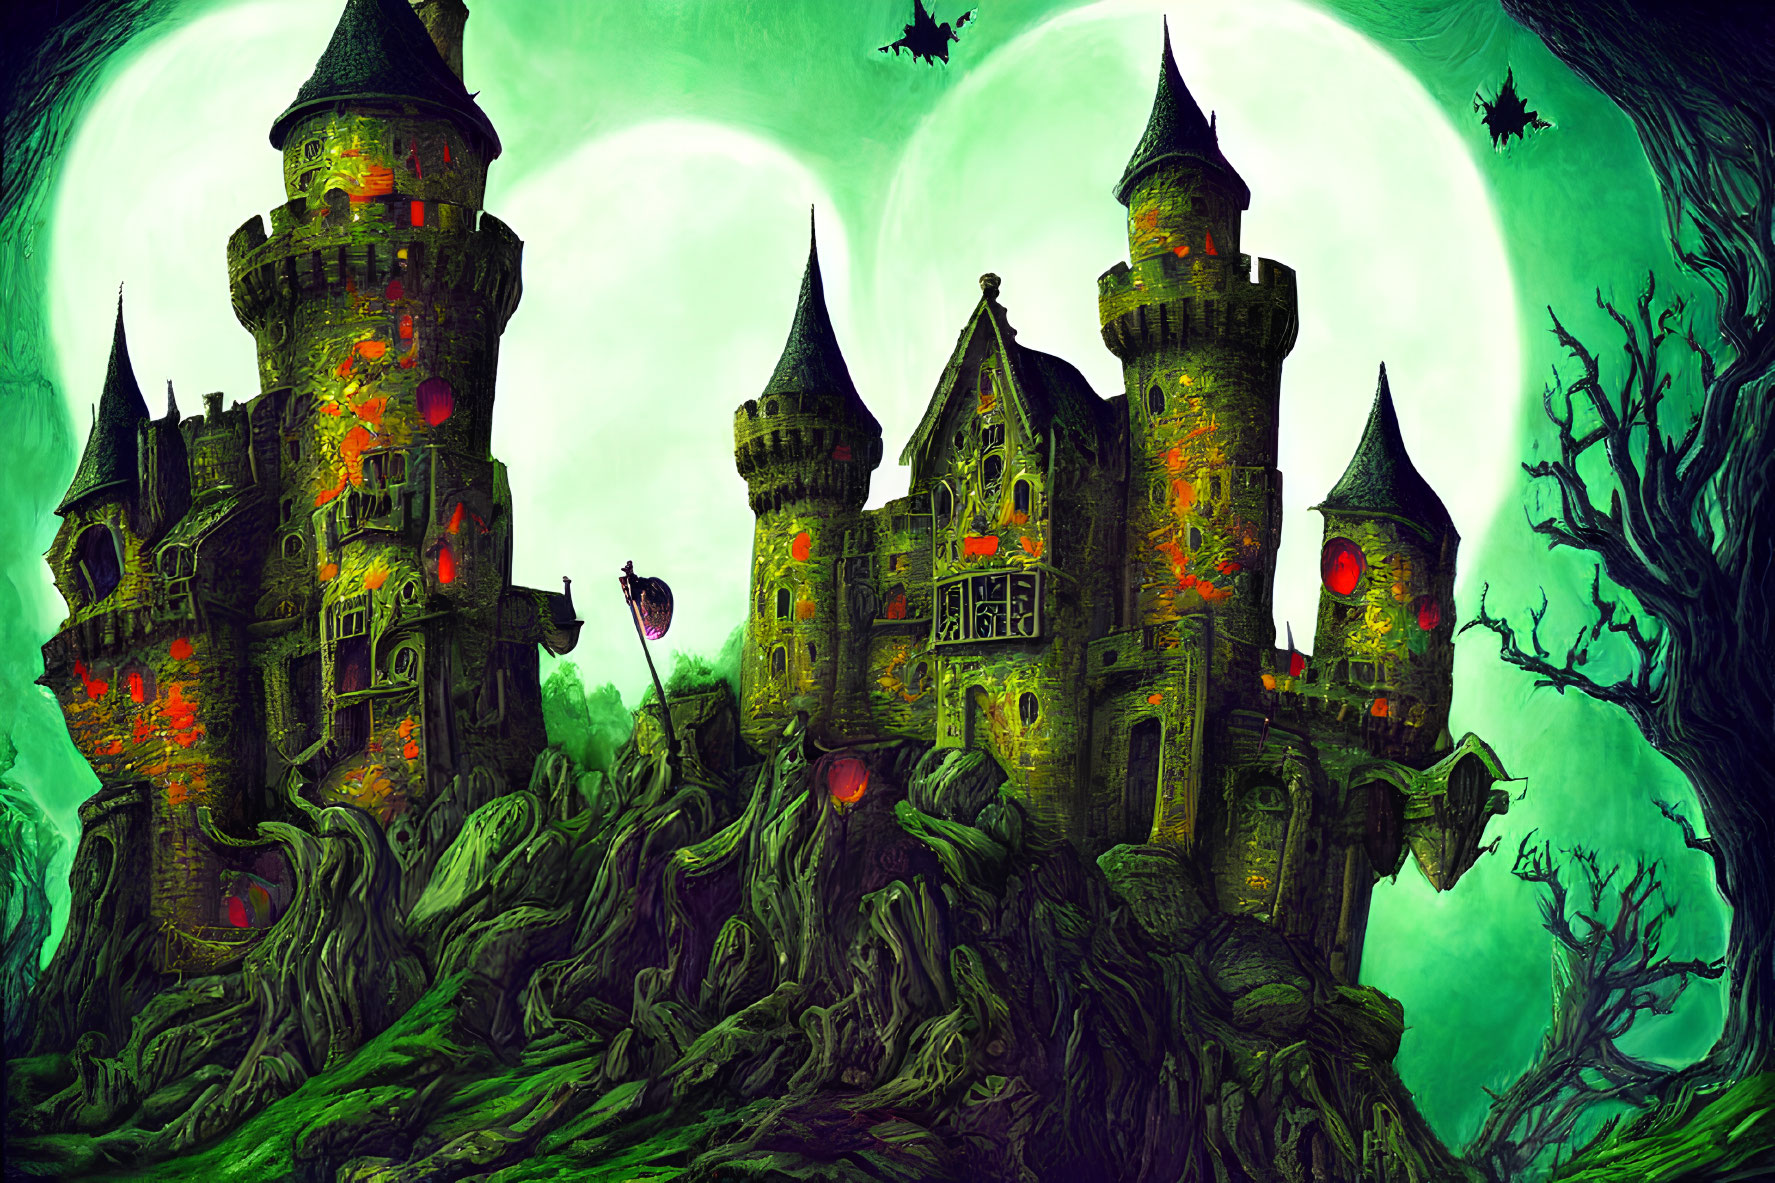 Spooky gothic castle under twin moons and flying bats